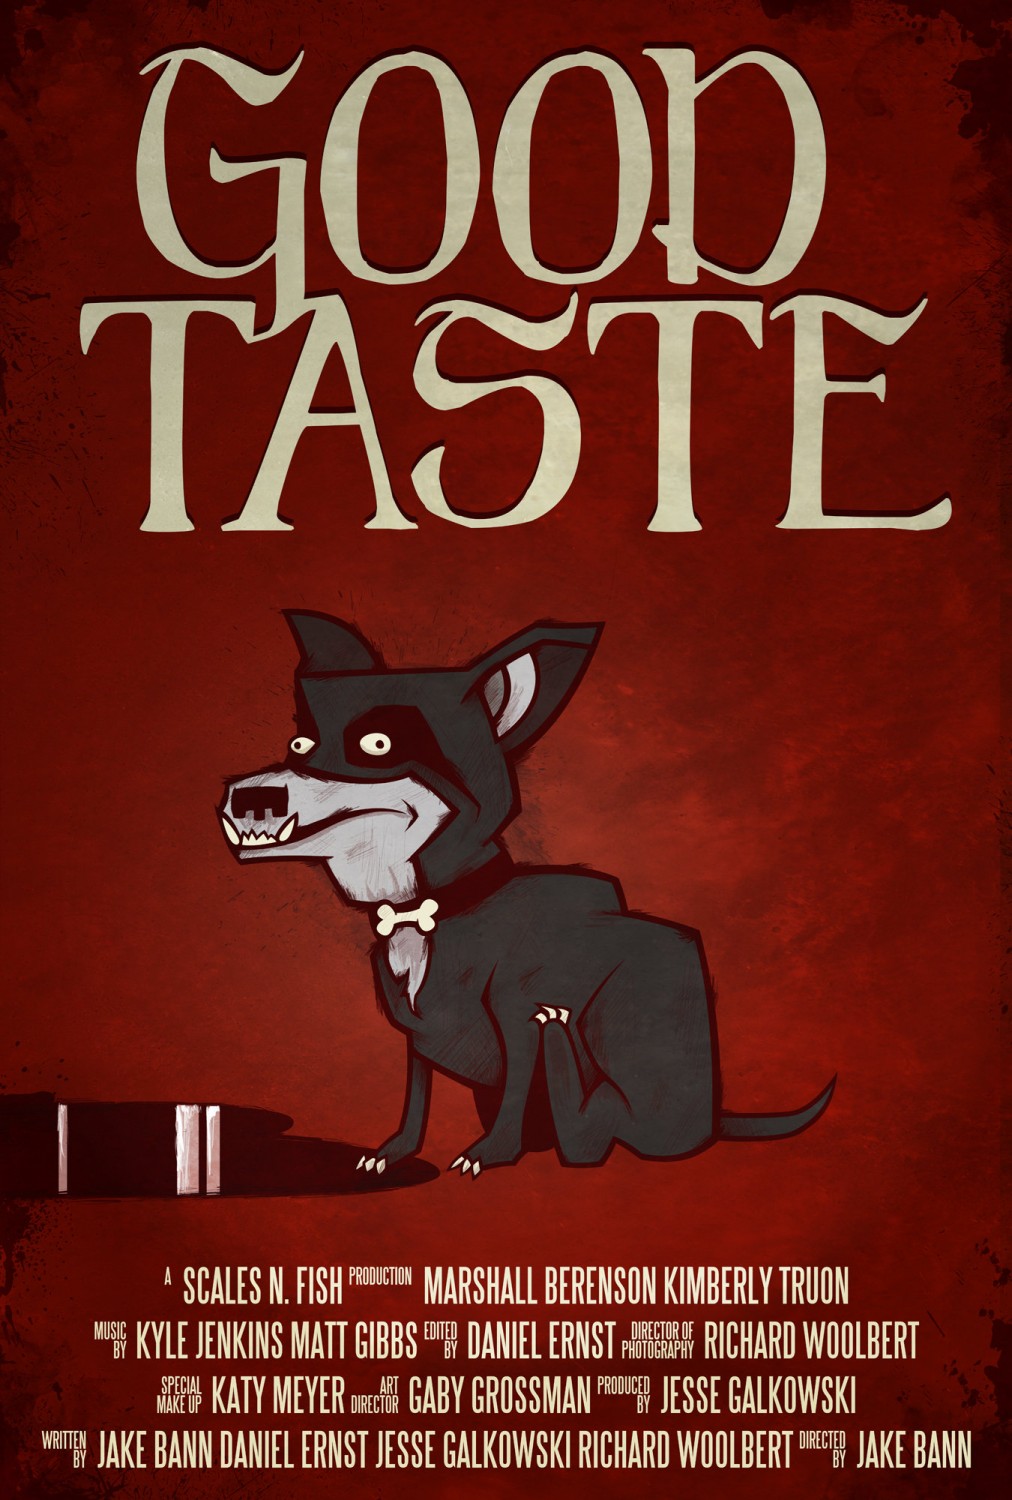 Extra Large Movie Poster Image for Good Taste